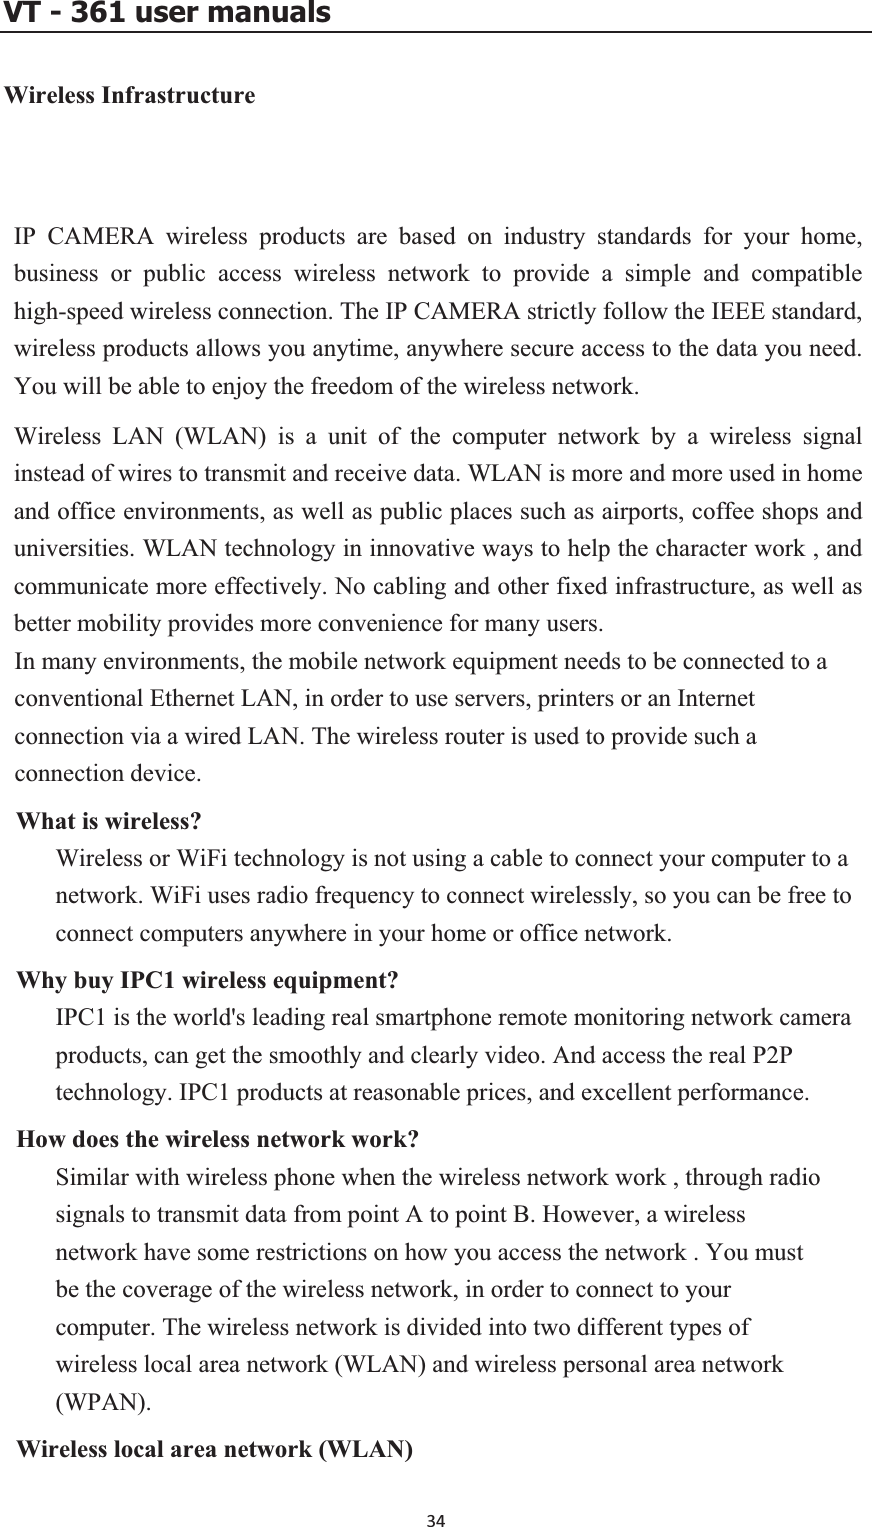 VT - 361 user manualsWireless Infrastructure IP CAMERA wireless products are based on industry standards for your home, business or public access wireless network to provide a simple and compatible high-speed wireless connect  str ,here secure access to the data you need. y th reedom of the wireless network. Wireless LAN (WLAN) is a unit of the computer network by a wireless signal instead of wires to transmit  N eand office environments, as well as public places such as airports, coffee shops and universities. WLAN technology in innovative ways to help the character work , and ectiv herbetter mobility provides mo ience for many In many environments, the mobile network equipment needs to be connected to a conventional Ethernet LAN , pconnection via a wired LAN. The wireless router is uWhat is wireless? Wireless or WiFi technology is not using a cable to connect your computer to a network. WiFi uses radio frequency to connect wirelessly, so you can be free to connect computers anywhere in your home or office network. ireless equipment? IPC1 is the world&apos;s leading real smartphone remote monitoring network camera products, can get the smoothly and clearly video. And access the real P2P technology. IPC1 products at reasonable prices, and excellent performance.  does the wireless network work? Similar with wireless phone when the wireless network work , through radio signals to transmit data from point A to point B. However, a wireless network have some restrictions on how you access the network . You must be the coverage of the wireless network, in order to connect to your computer. The wireless network is divided into two different types of wireless local area network (WLAN) and wireless personal area network (WPAN).cal area network (WLAN) ion. The IP CAMERA ictly follow the IEEE standardwireless products allows you anytime, anywYou will be able to enjo e fand receive data. WLA is more and more used in homcommunicate more eff ely. No cabling and otre conven fixed infrastructure, as well as users.  , in order to use servers rinters or an Internet sed to provide such a connection device. Why buy IPC1 wHowWireless lo34